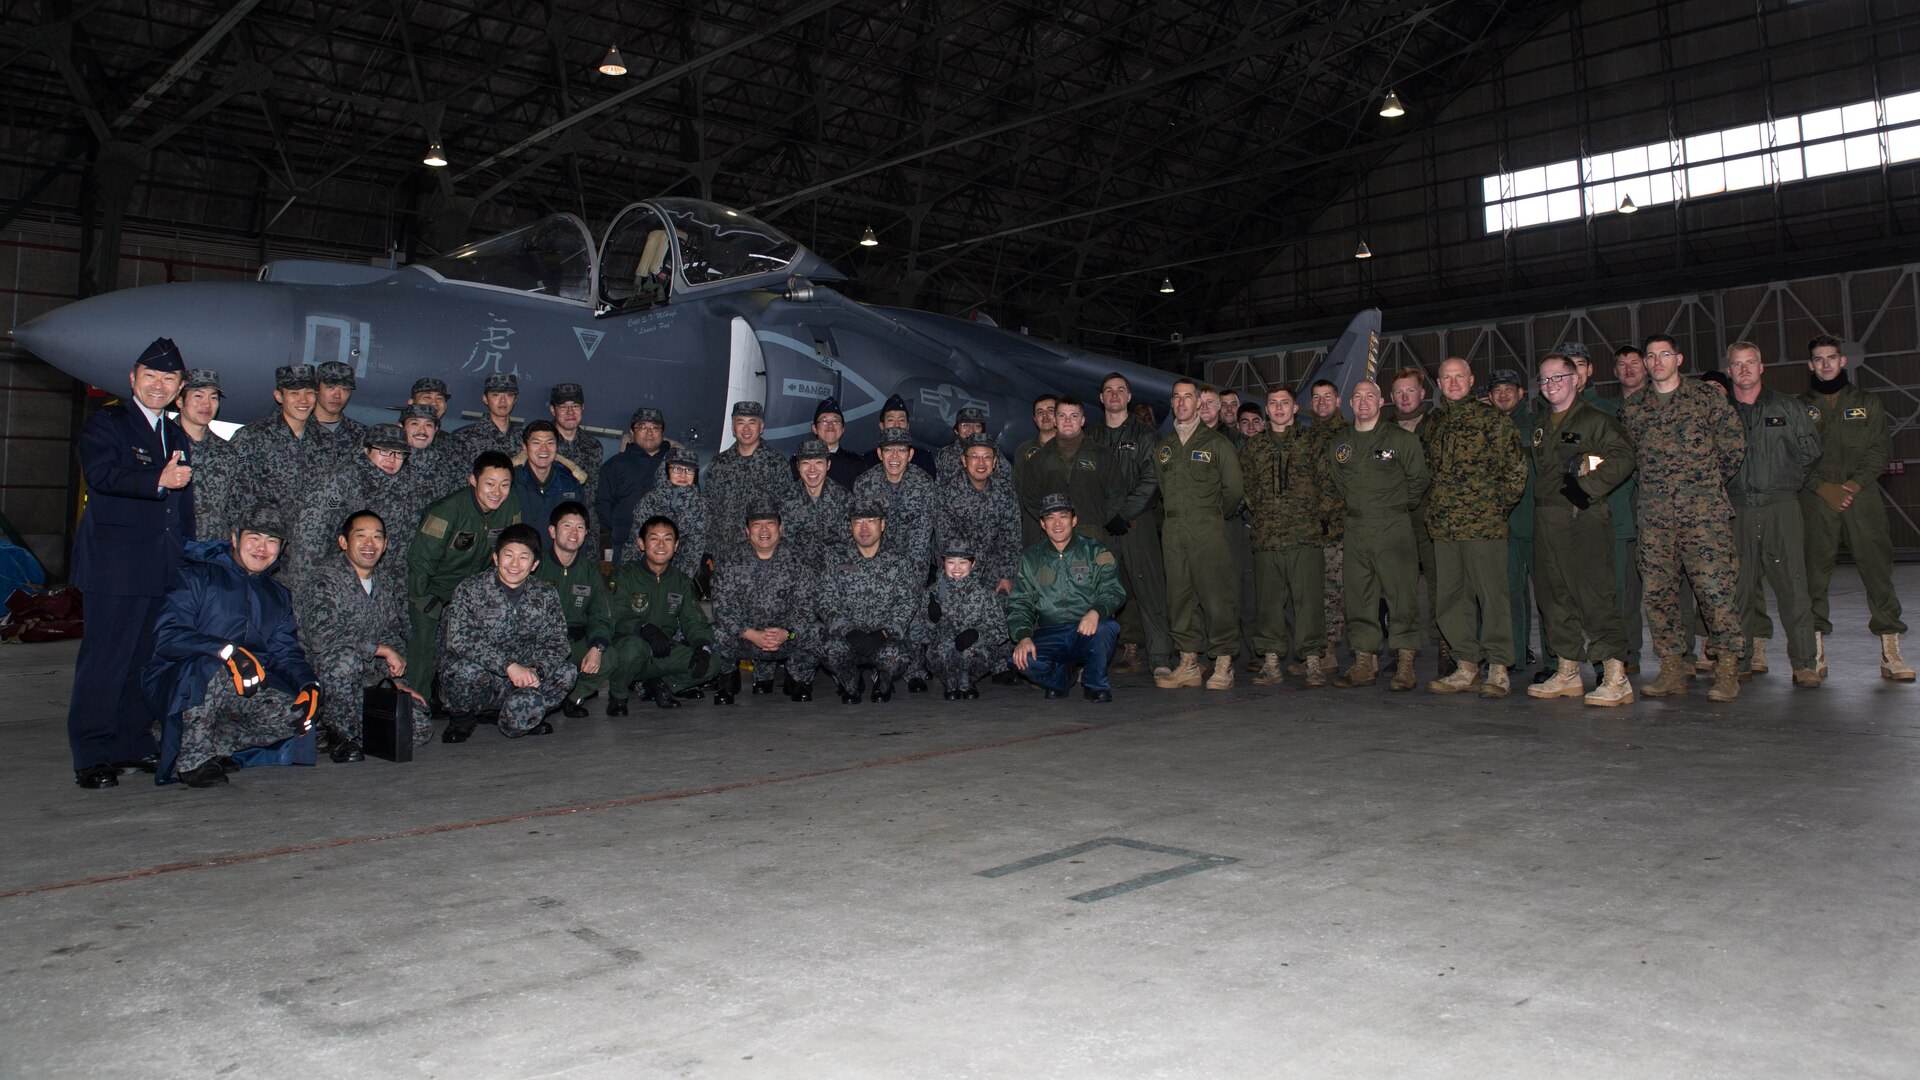 U.S. Marines with Marine Attack Squadron (VMA) 542 and Japan Air Self Defense Force personnel pose for a photo during the Aviation Training Relocation Program at Chitose Air Base, Japan, Dec. 9, 2016. JASDF personnel joined the VMA-542 Marines in their hangar to get a closer look and better understanding of the squadrons Harriers. (U.S. Marine Corps photo by Lance Cpl. Joseph Abrego)